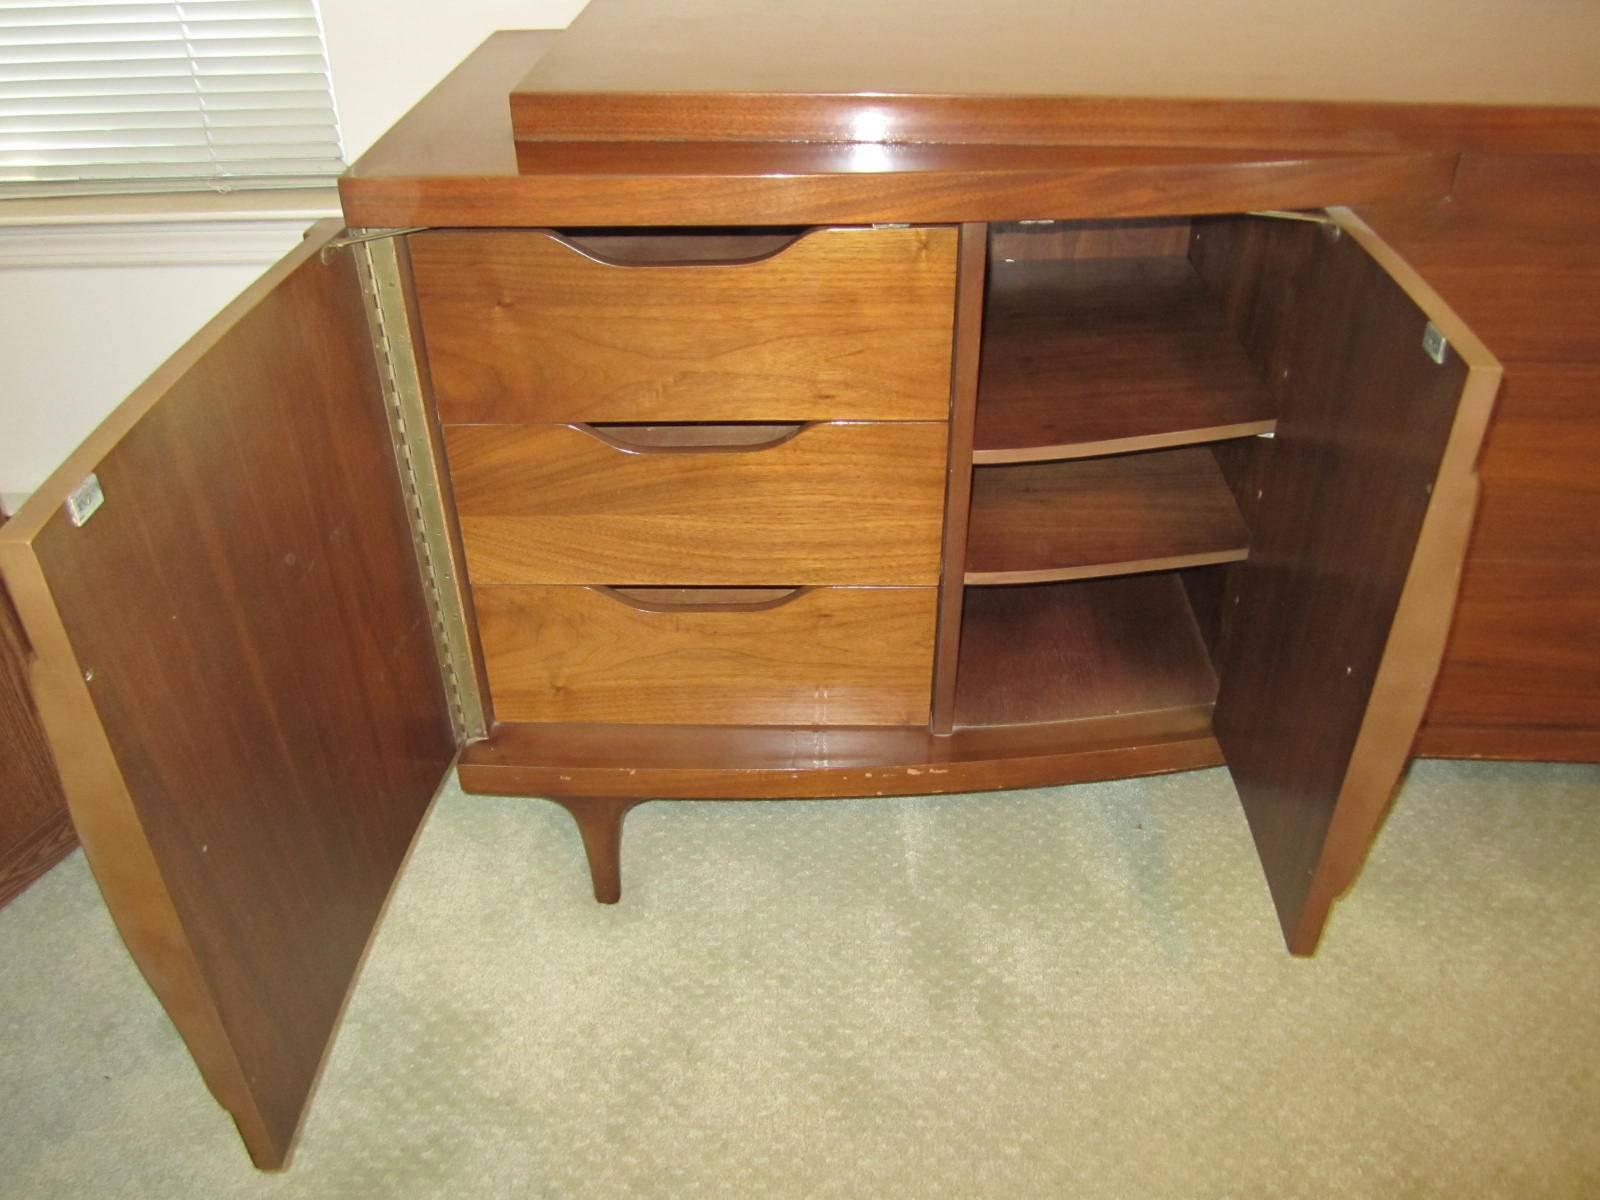 Gorgeous American Modern Sculptural Walnut Credenza In Good Condition For Sale In Pemberton, NJ